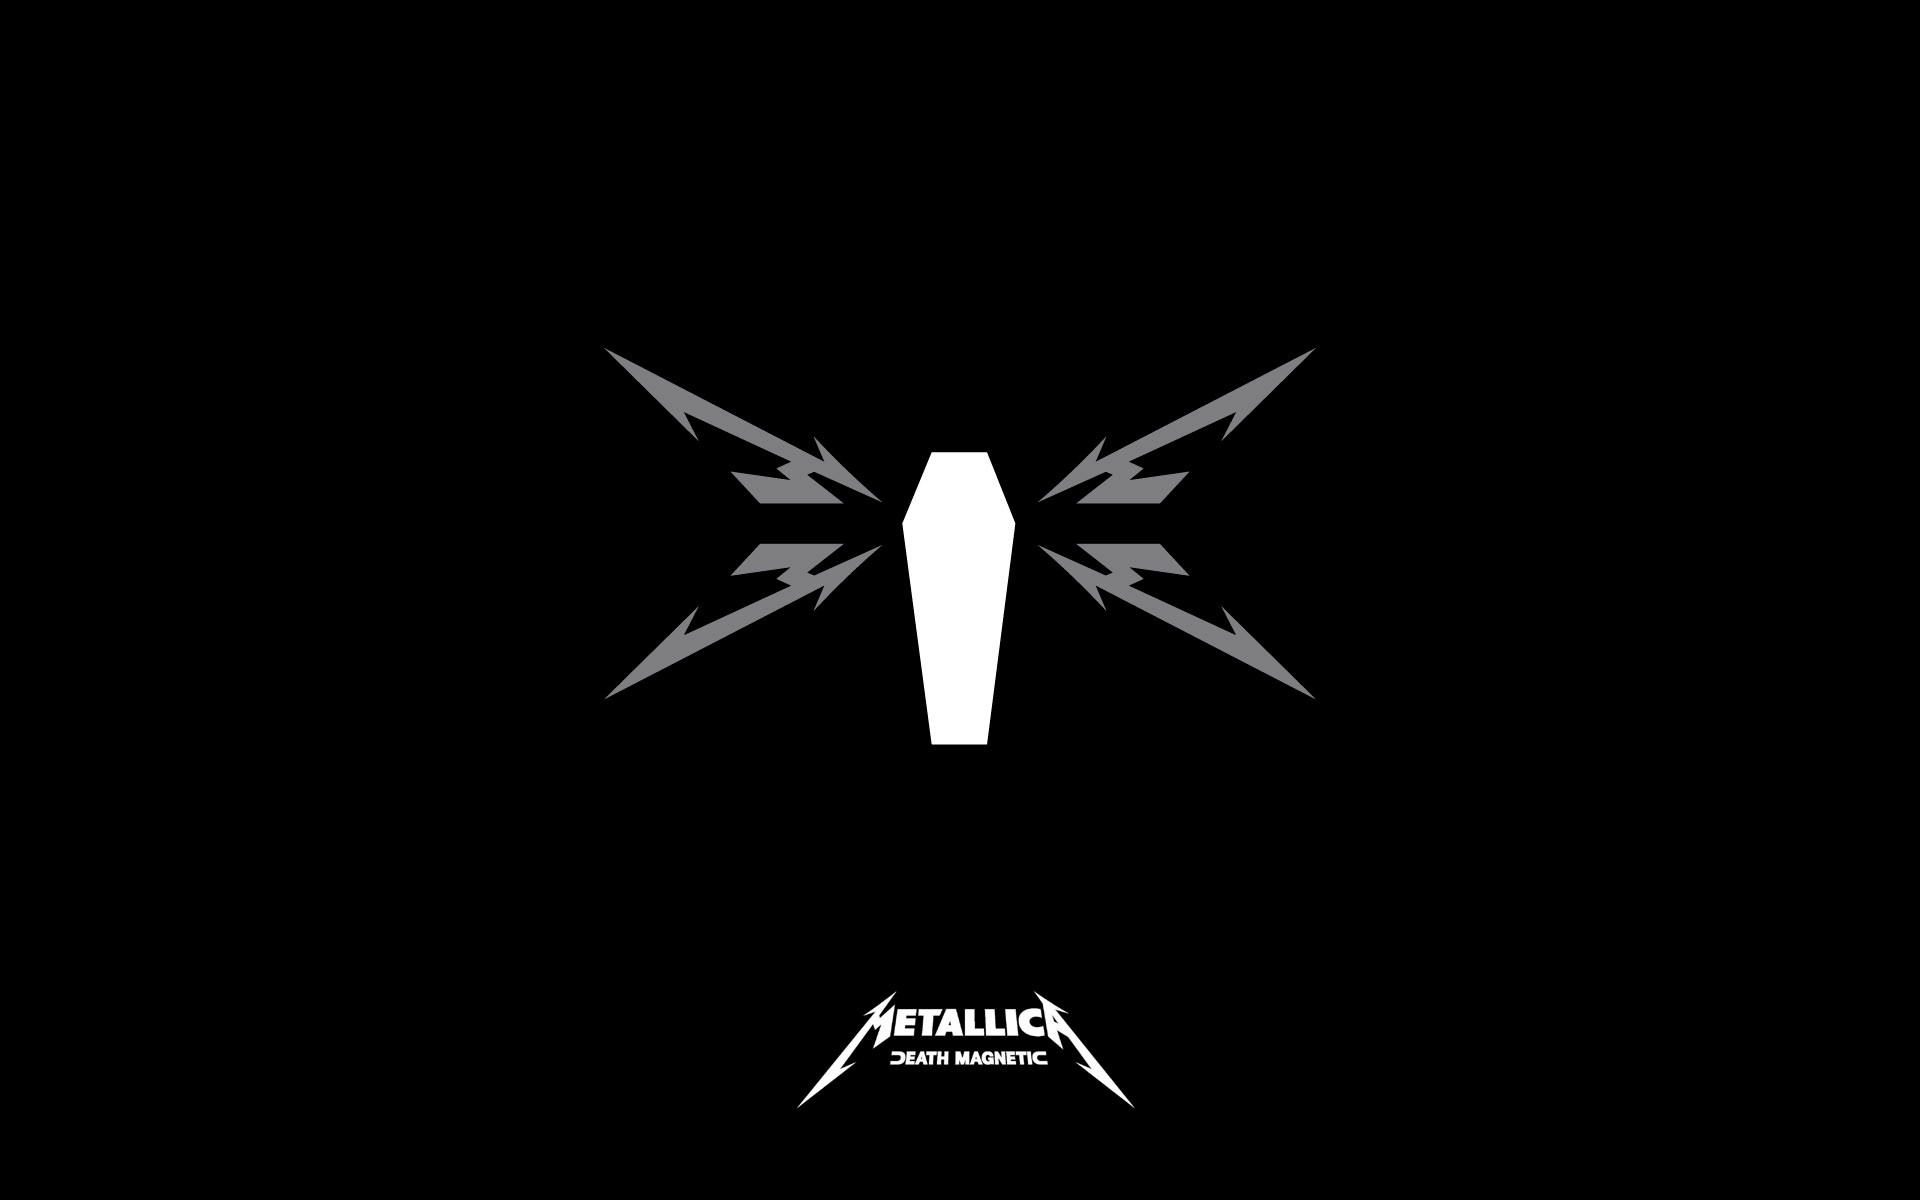 1920x1200 Metallica Death Magnetic  WIDE Image Music and Bands .